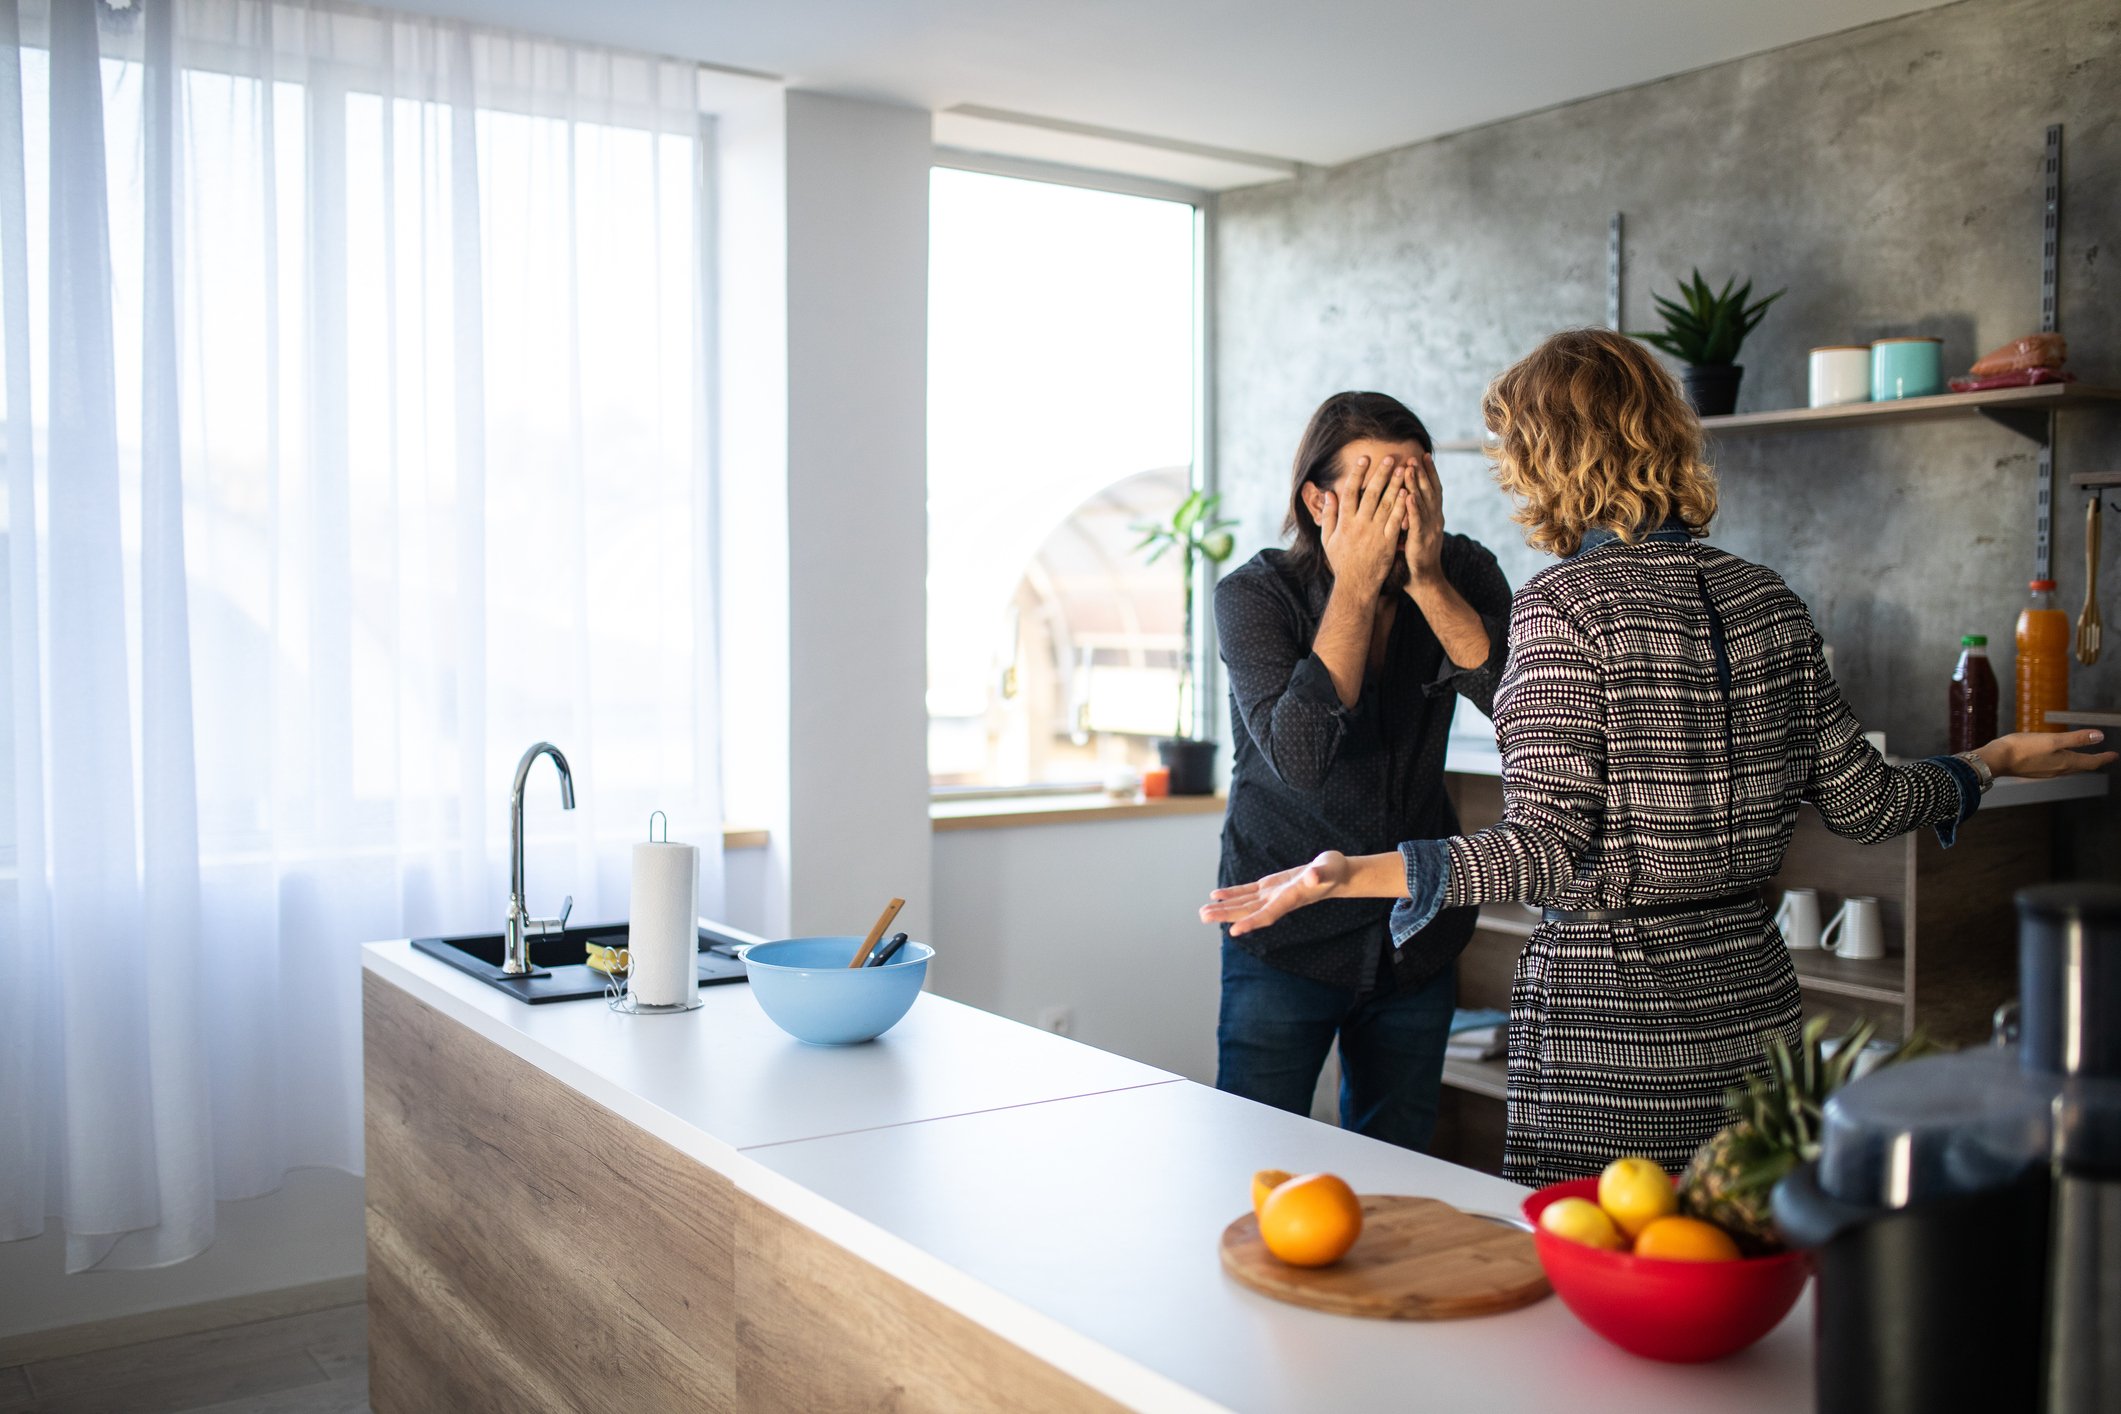 A man and a woman having argument in the kitchen in the morning | Photo: Getty Images